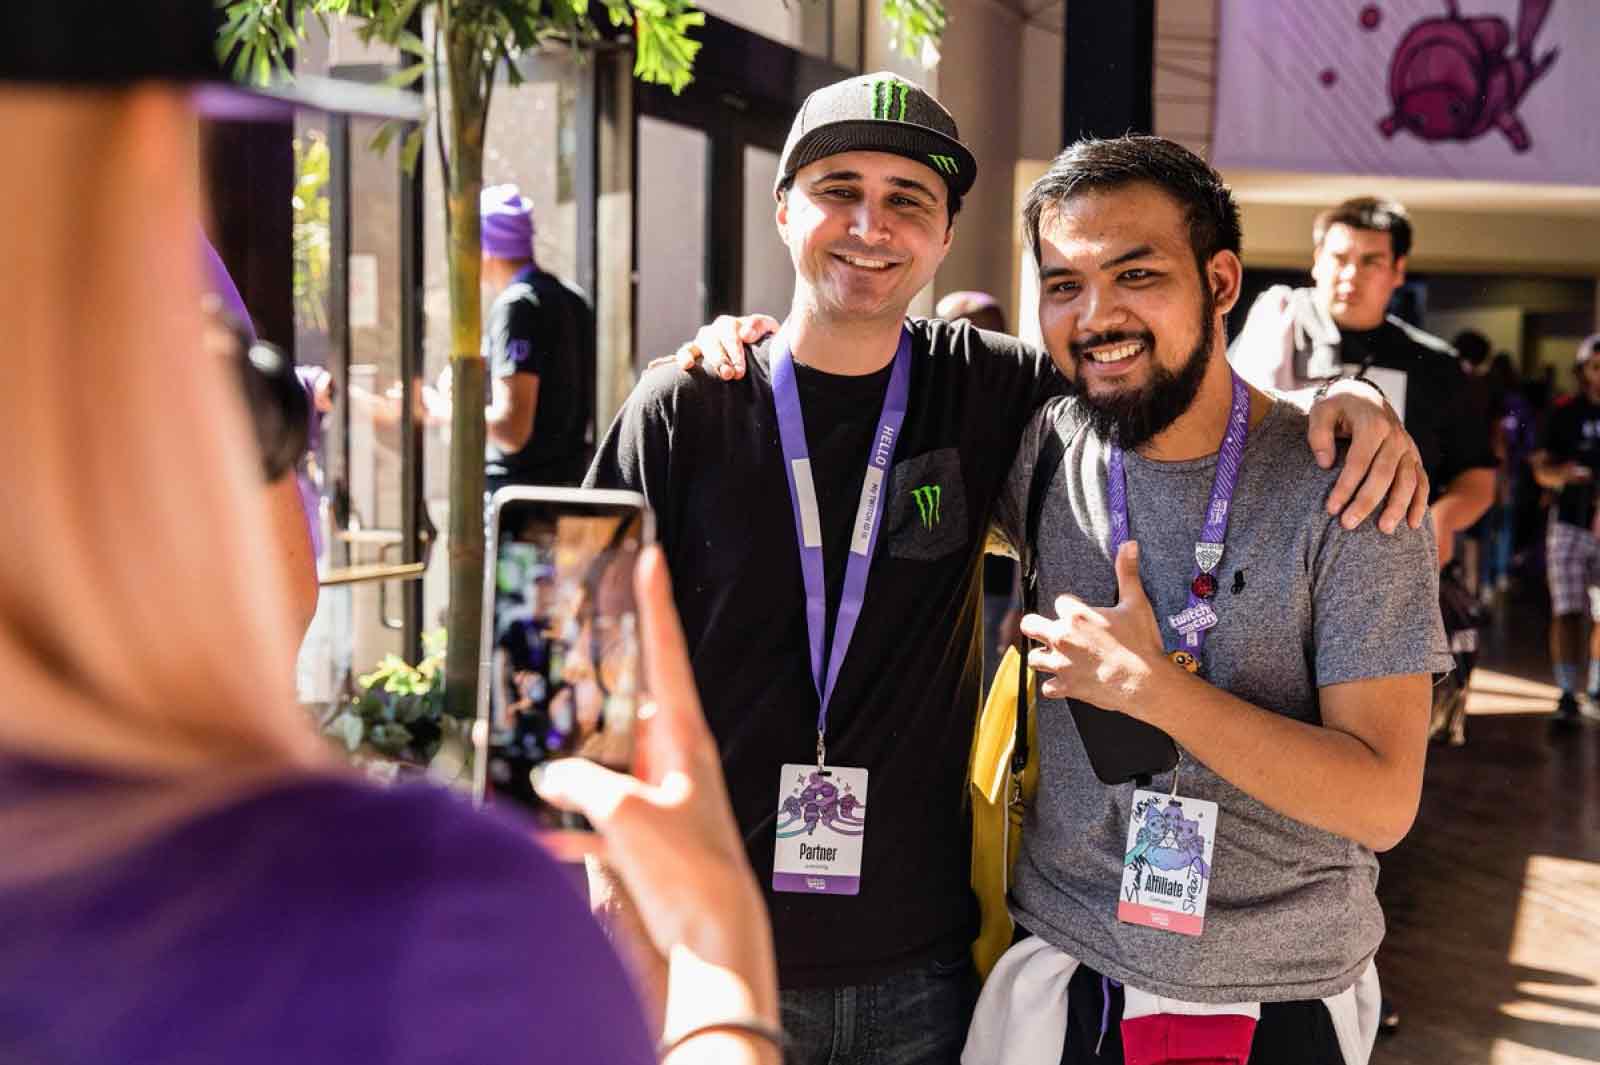 Two TwitchCon attendees pose together for a picture.